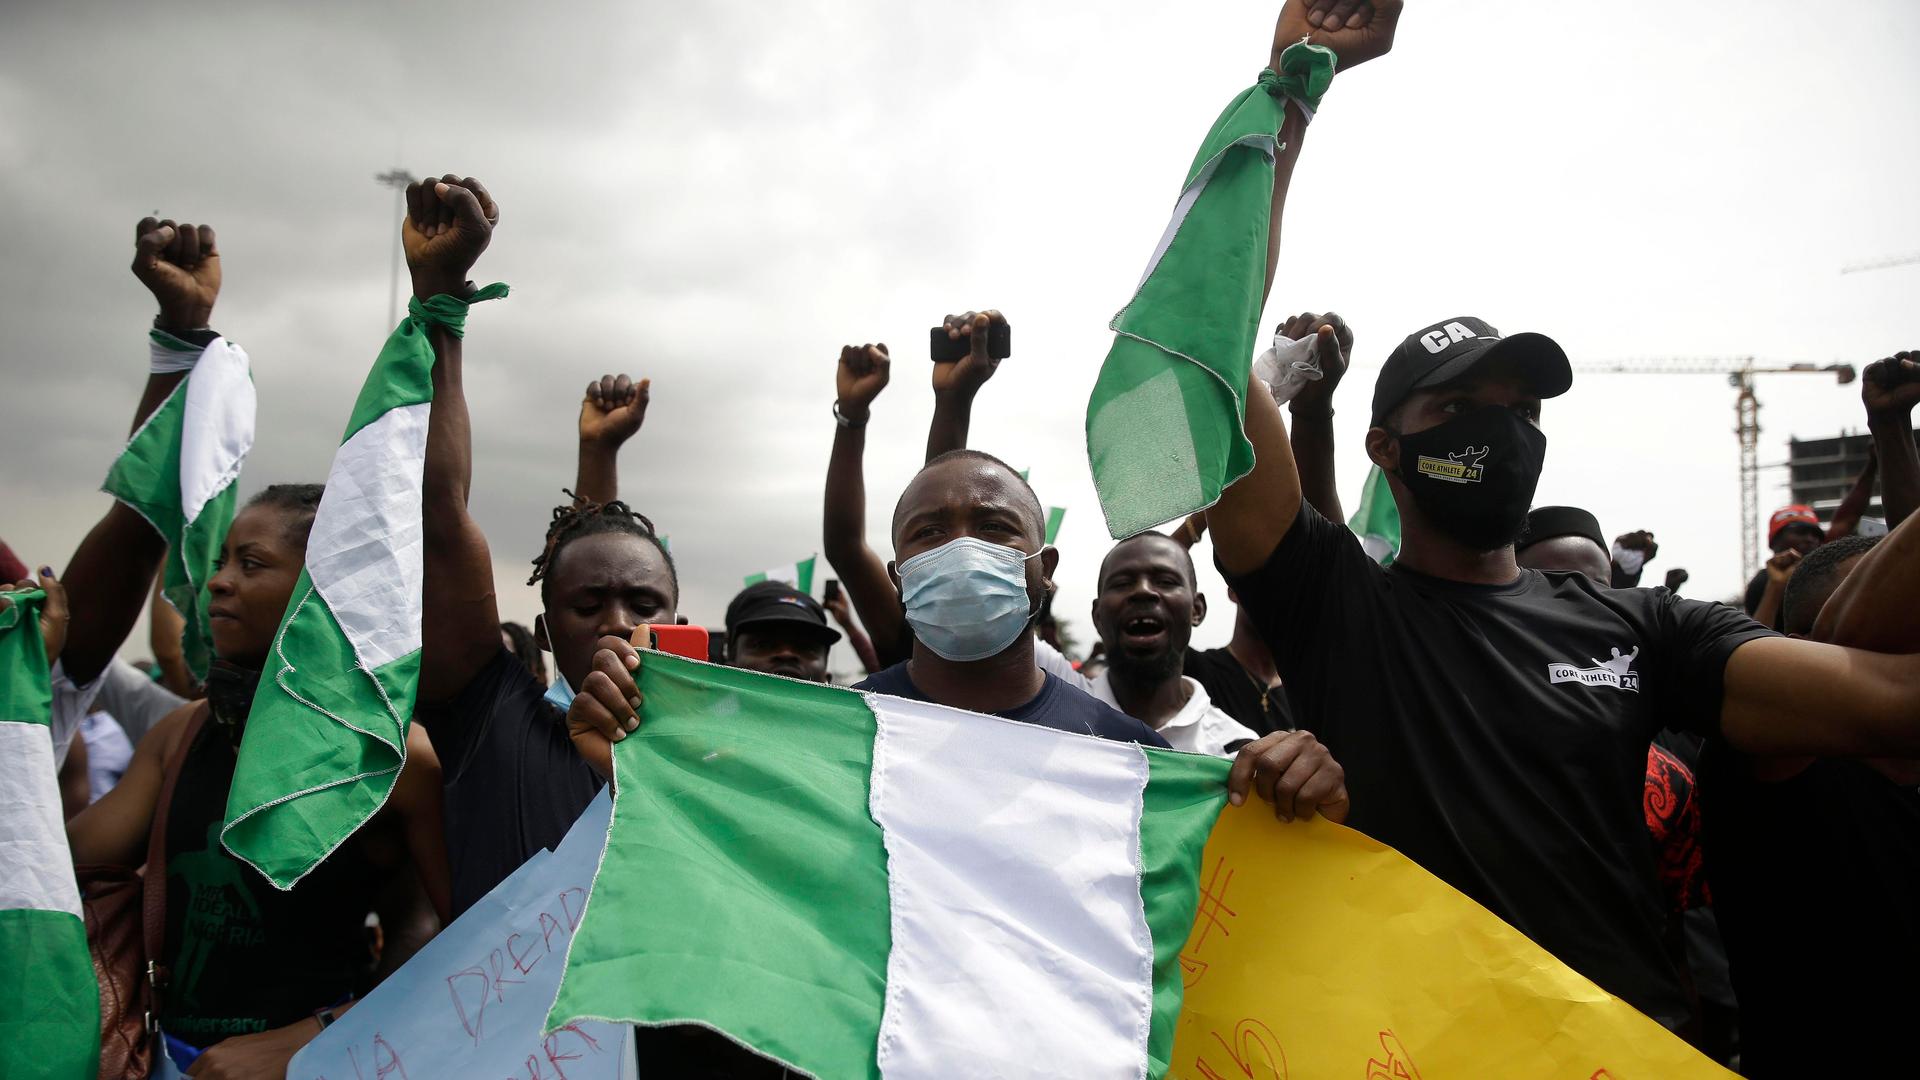 People hold banners as they demonstrate on the street to protest against police brutality in Lagos, Nigeria, Oct. 19, 2020.